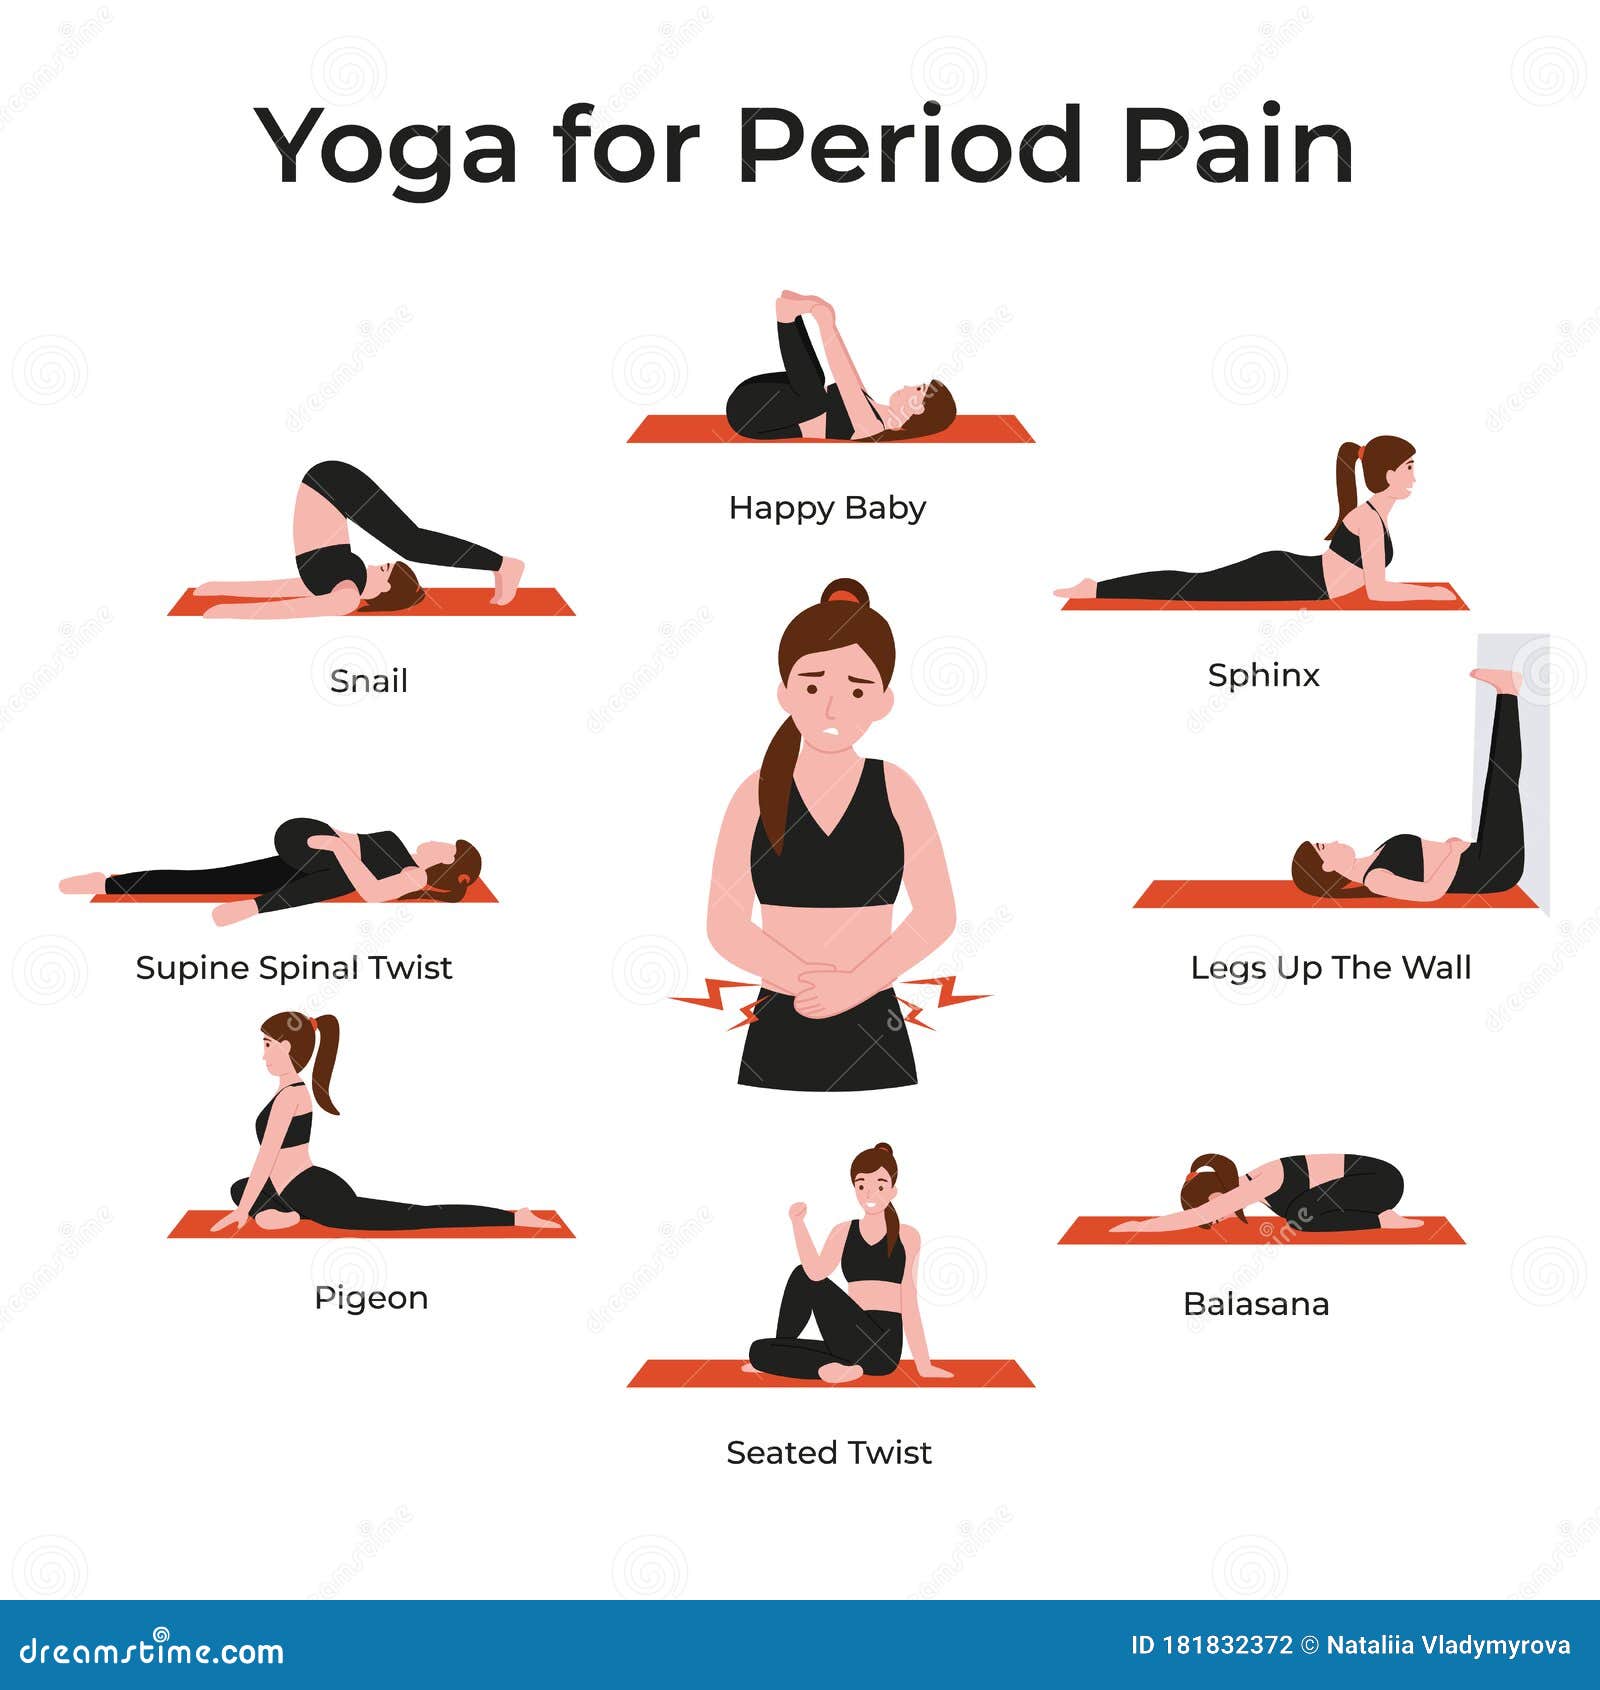 Here are the Best Exercises for Period Pain | The Healthy